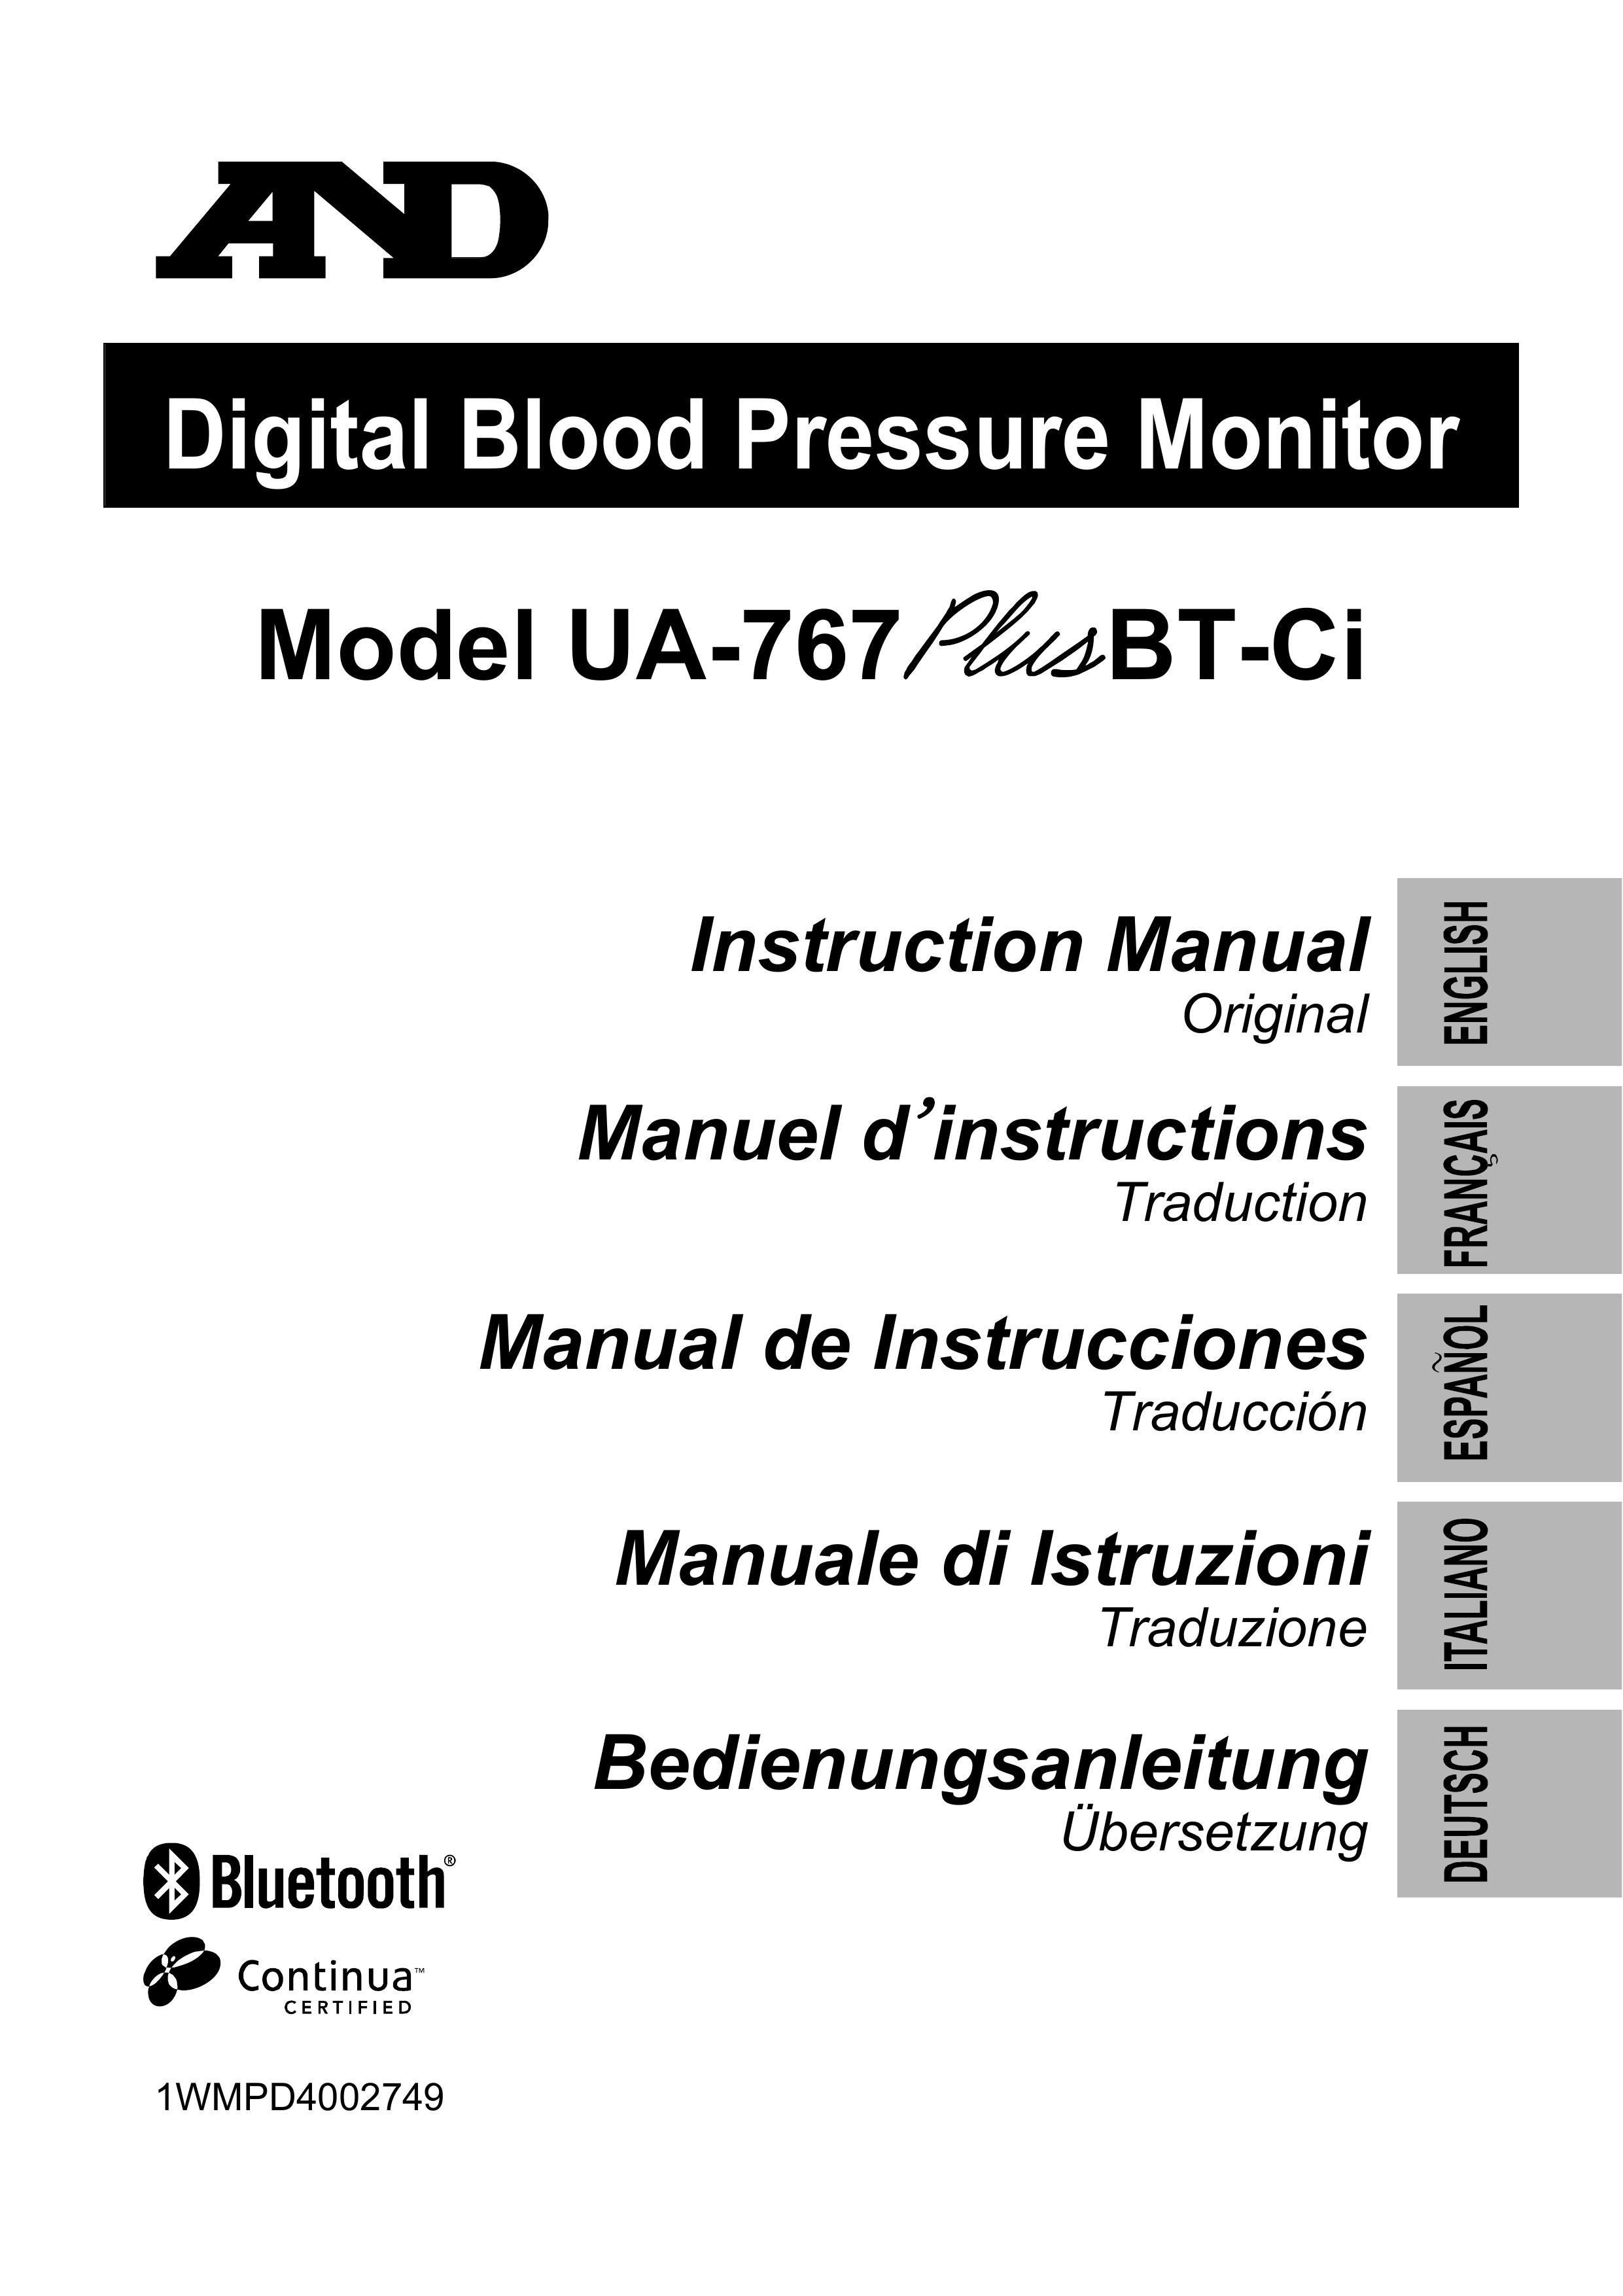 A&D BT-Ci Blood Pressure Monitor User Manual (Page 1)